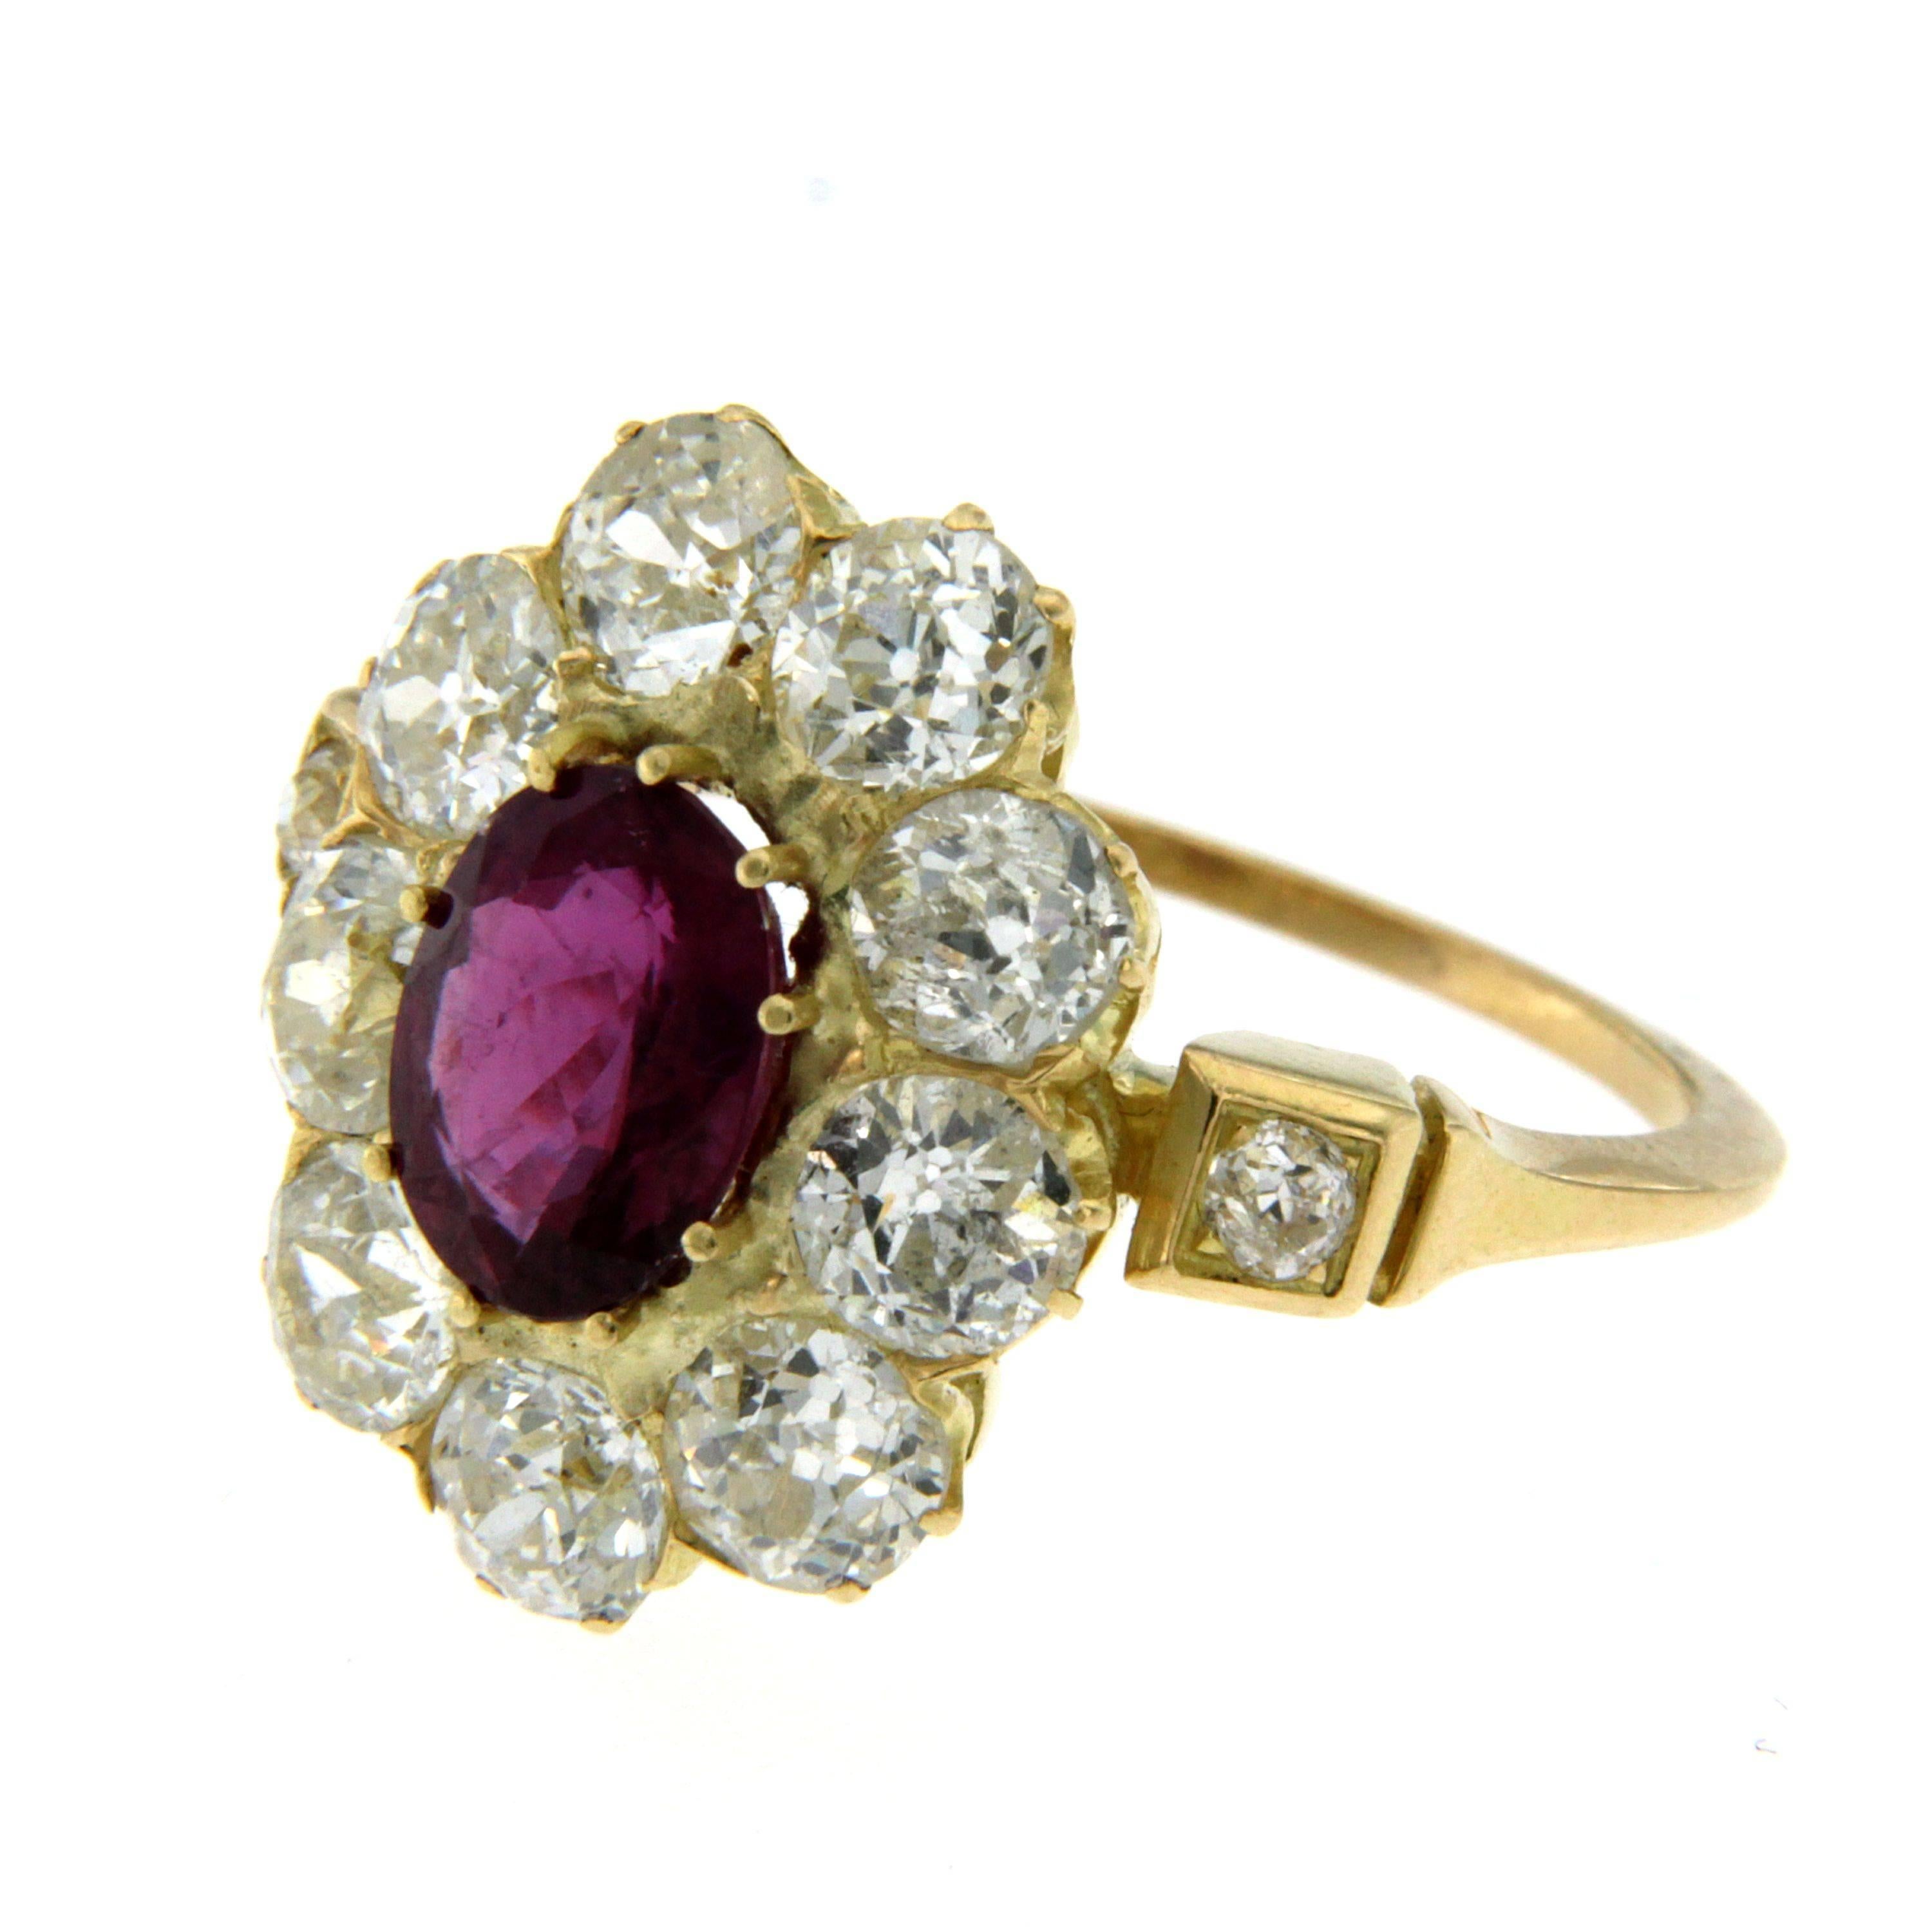 Feminine and sensual daisy shape genuine Victorian handmade ring 1890 circa

Natural ruby weighing 2.50 carats of outstanding color, light and clarity, surrounded by 9 Old Mine cut Diamonds each 0.35 ct approximately - Tot. 3.15 carats Color I